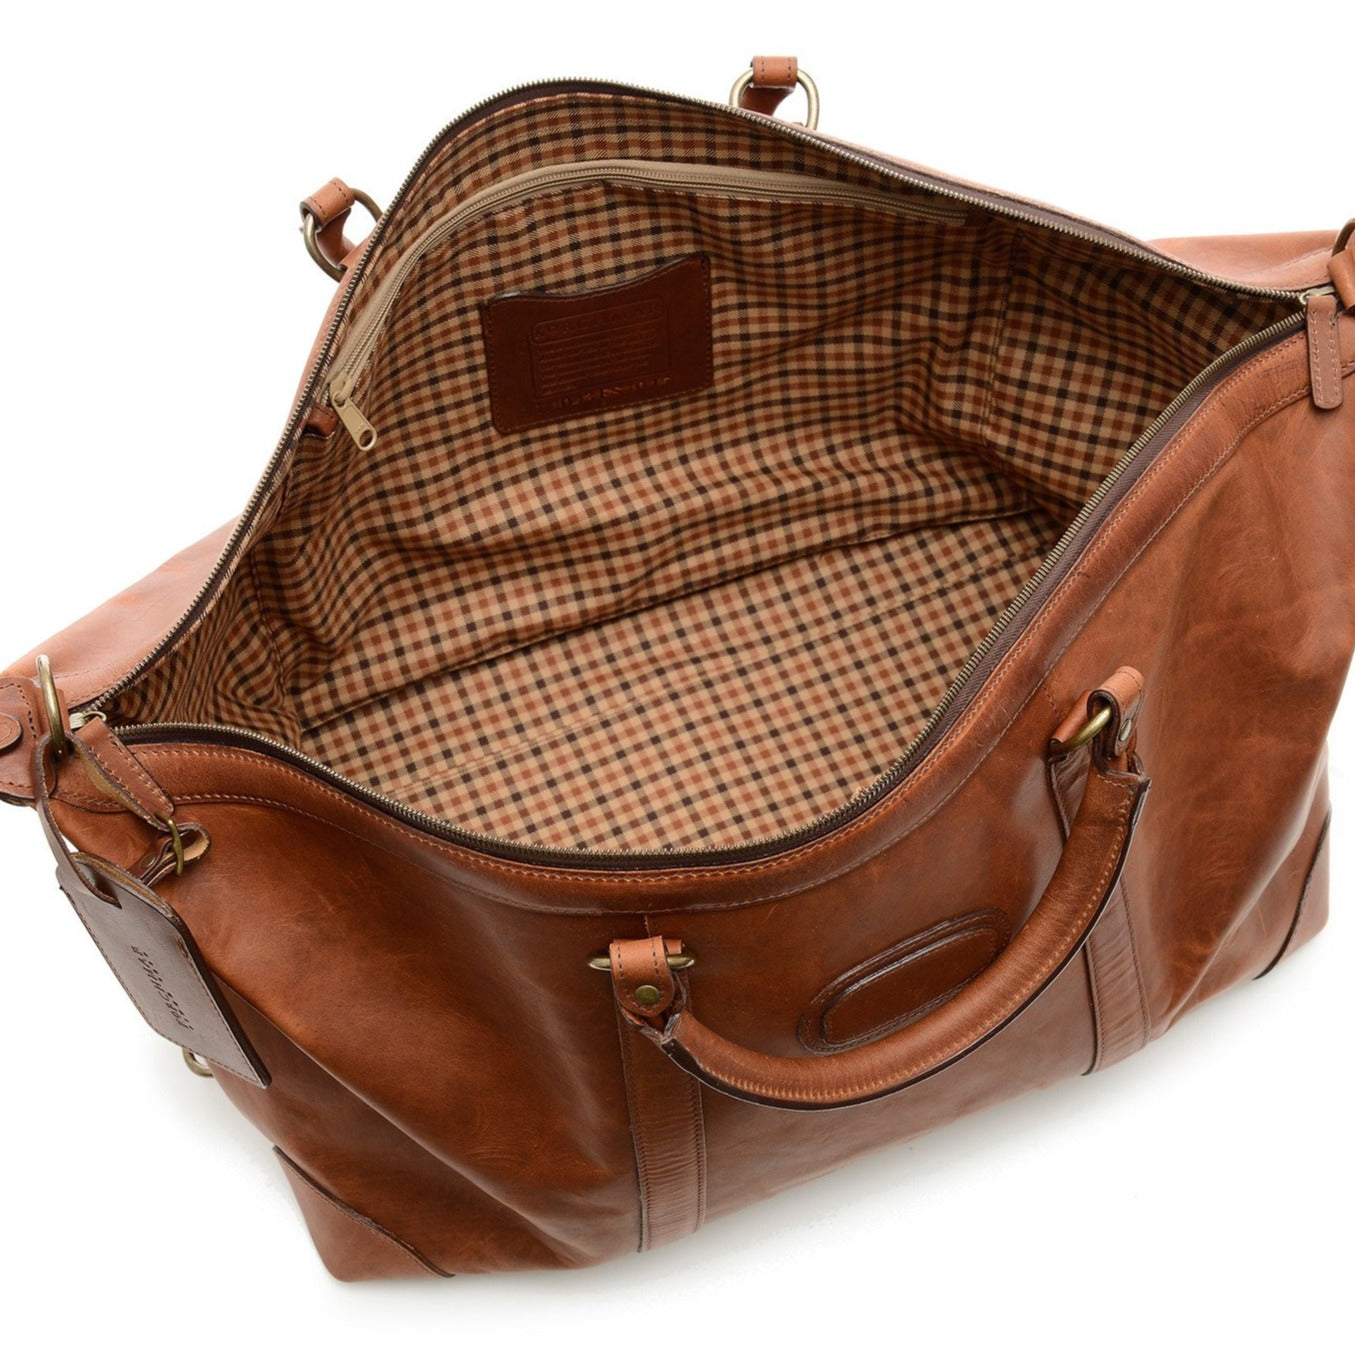 Duffel | All Leather Duffle | Twain Brown Leather Duffel | Korchmar Leather | Initials Included